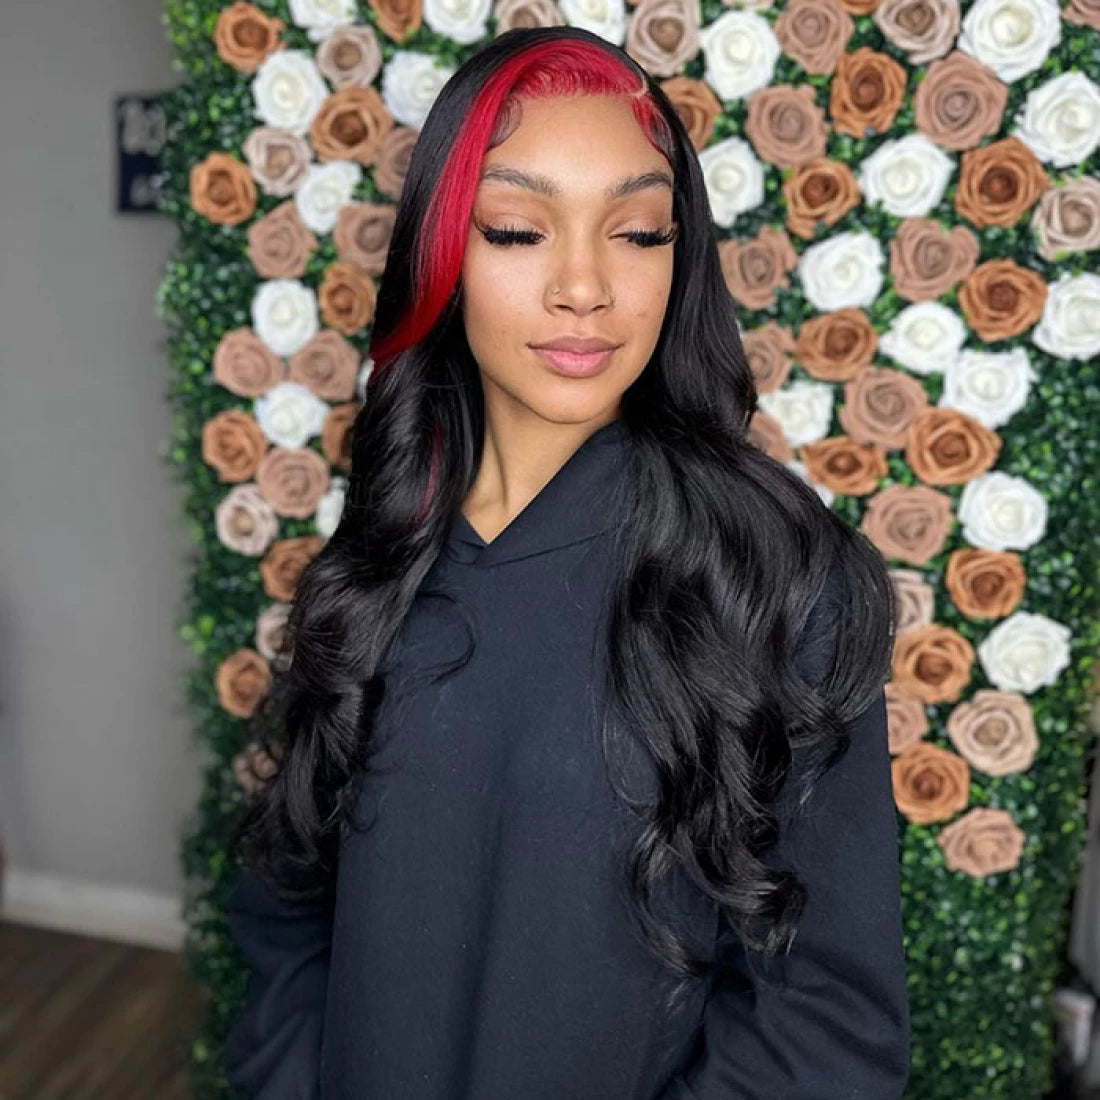 Tedhair 28 Inches 13x4 #1B/Highlight Red Body Wave Lace Frontal Wigs 200% Density-100% Human Hair